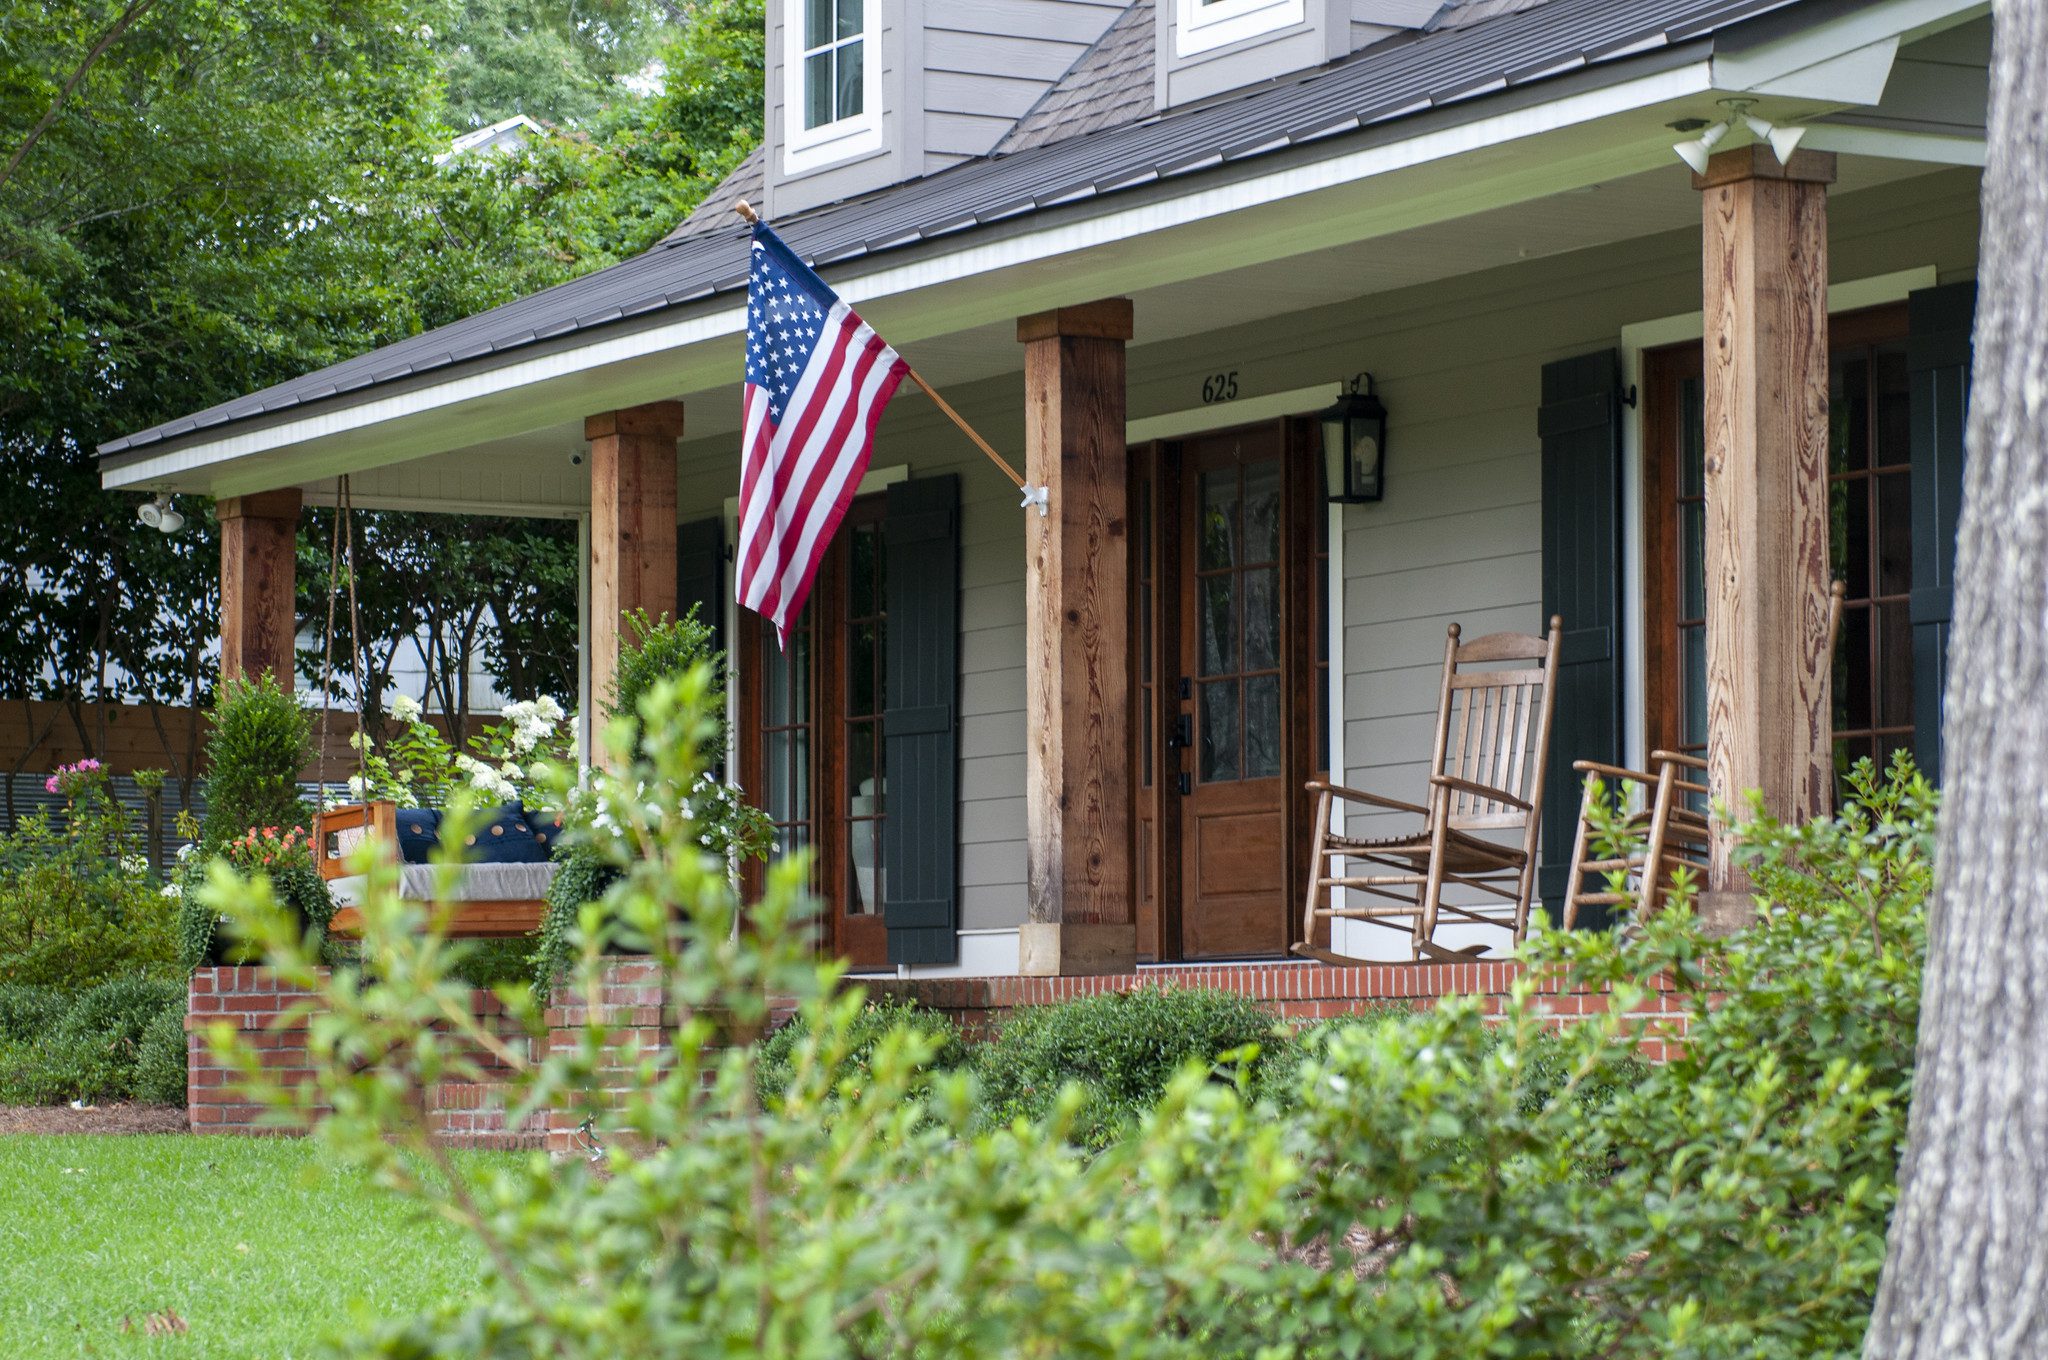 A house with an American flag hanging on the front porch